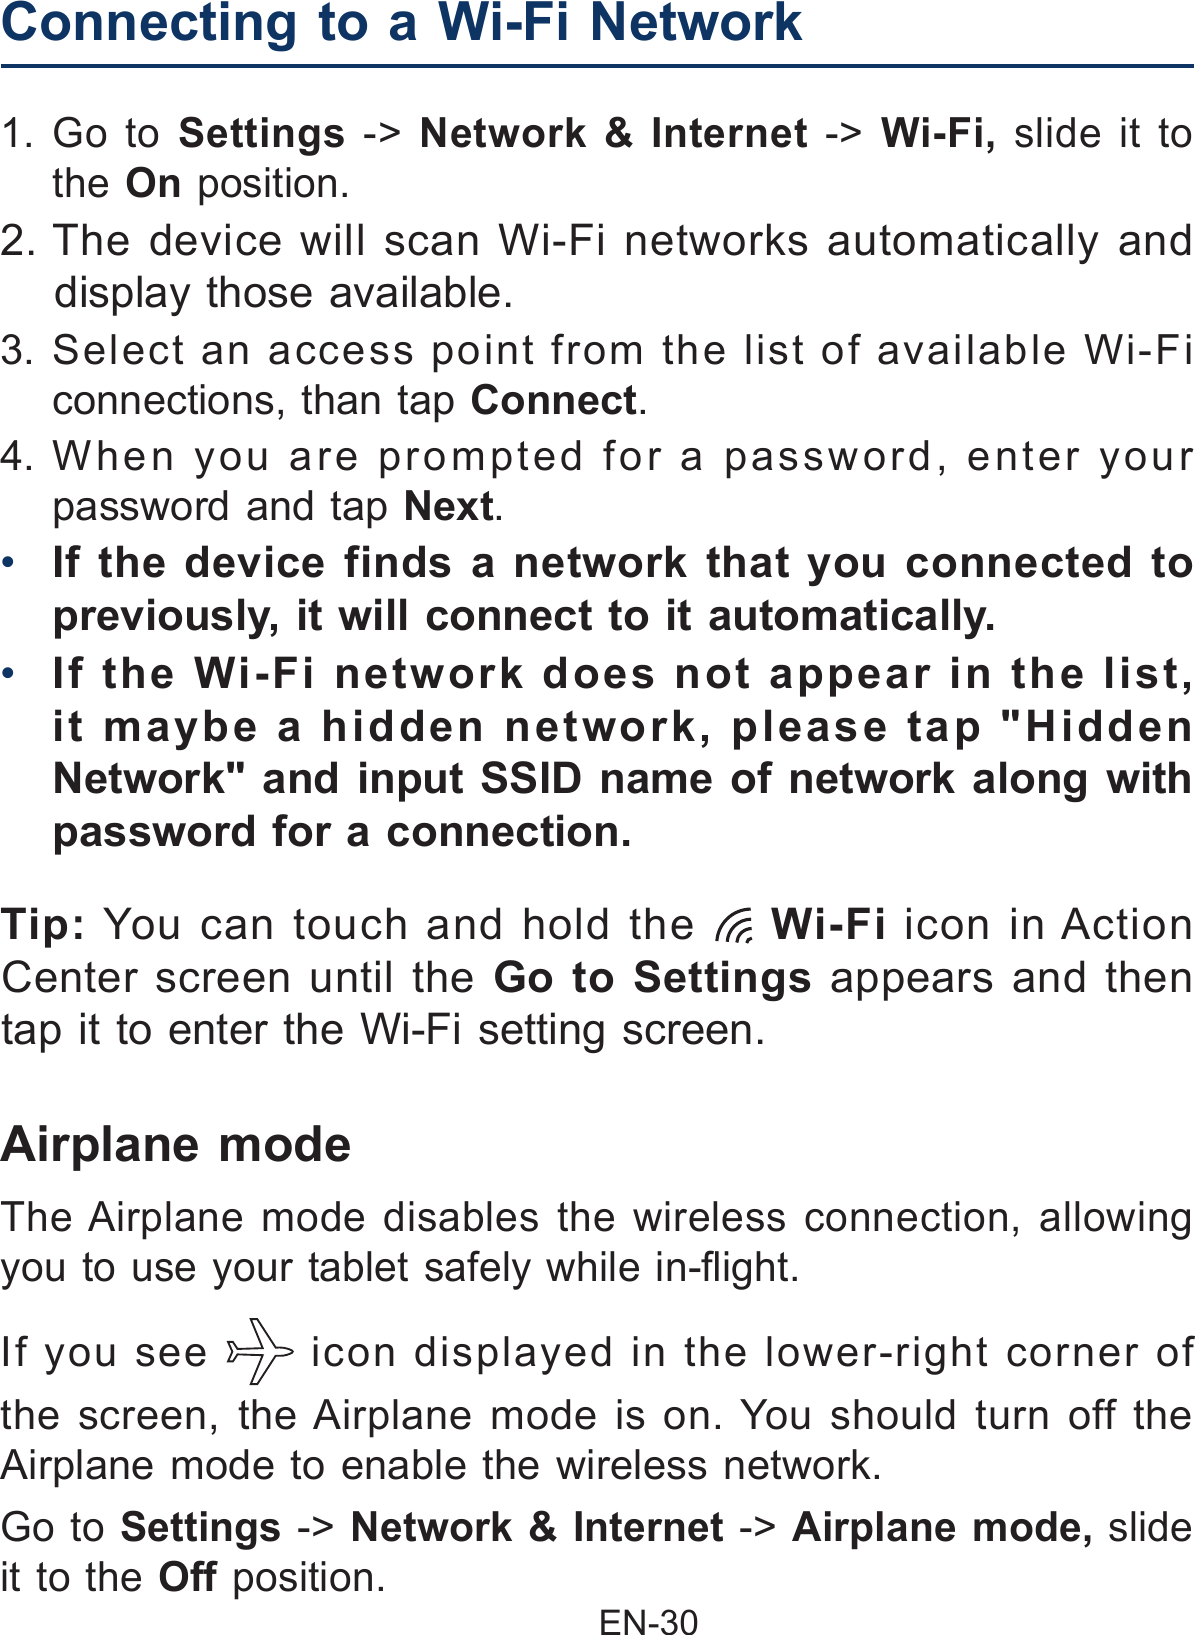                                                EN-30 Airplane modeIf you see   icon displayed in the lower-right corner of the screen, the Airplane mode is on. You should turn off the Airplane mode to enable the wireless network.Go to Settings -&gt; Network &amp; Internet -&gt; Airplane mode, slide it to the Off position.The Airplane mode disables the wireless connection, allowing you to use your tablet safely while in-ight.1. Go to Settings -&gt; Network &amp; Internet -&gt;  Wi-Fi,  slide it to the On position.2. The device will scan Wi-Fi networks automatically and display those available.3. Select an access point from the list of available Wi-Fi connections, than tap Connect.4. When you are prompted for a password, enter your password and tap Next.•  If the device finds a network that you connected to previously, it will connect to it automatically.•  If the Wi-Fi network does not appear in the list, it maybe a hidden network, please tap &quot;Hidden Network&quot; and input SSID name of network along with password for a connection.Connecting to a Wi-Fi Network  Tip: You can touch and hold the   Wi-Fi  icon in Action Center screen until the Go to Settings appears and then tap it to enter the Wi-Fi setting screen.